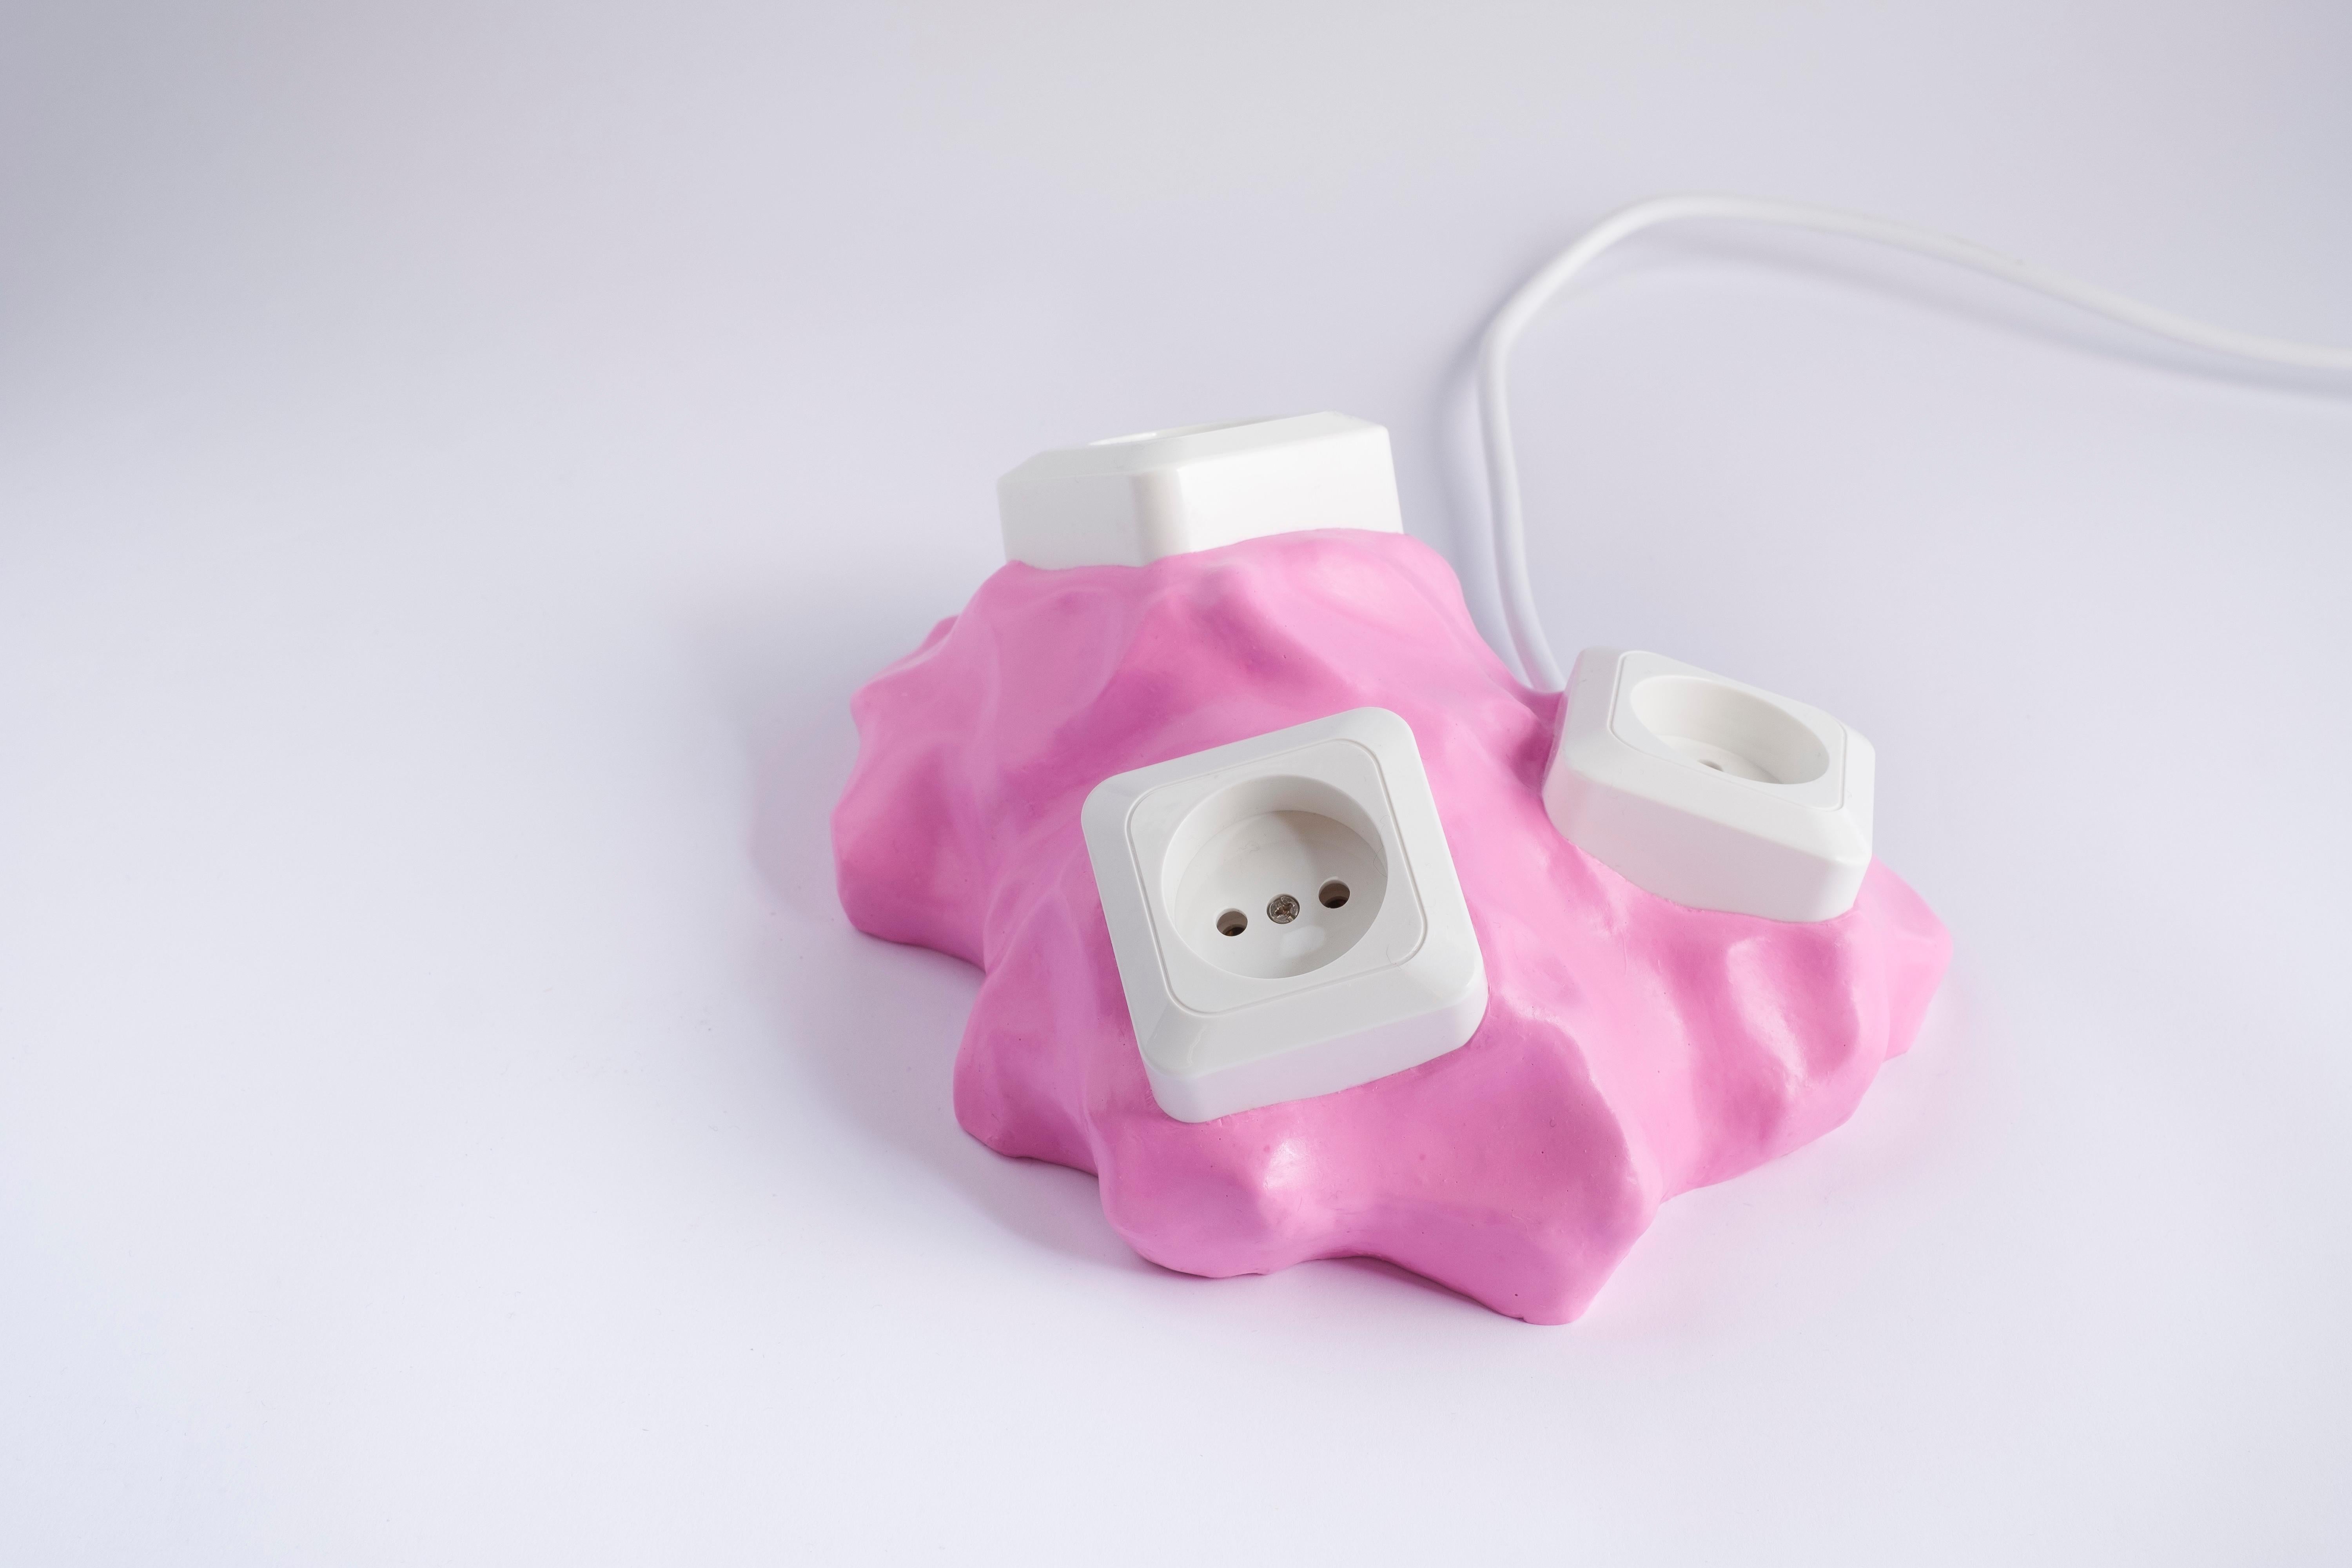 Tripple socket object 23. Rosa SAKER by Studio Gert Wessels, pink. Hand crafted in an organic shape and made in his studio in the Netherlands. 

In his daily practice he investigates the relationship between form and function. The result is a